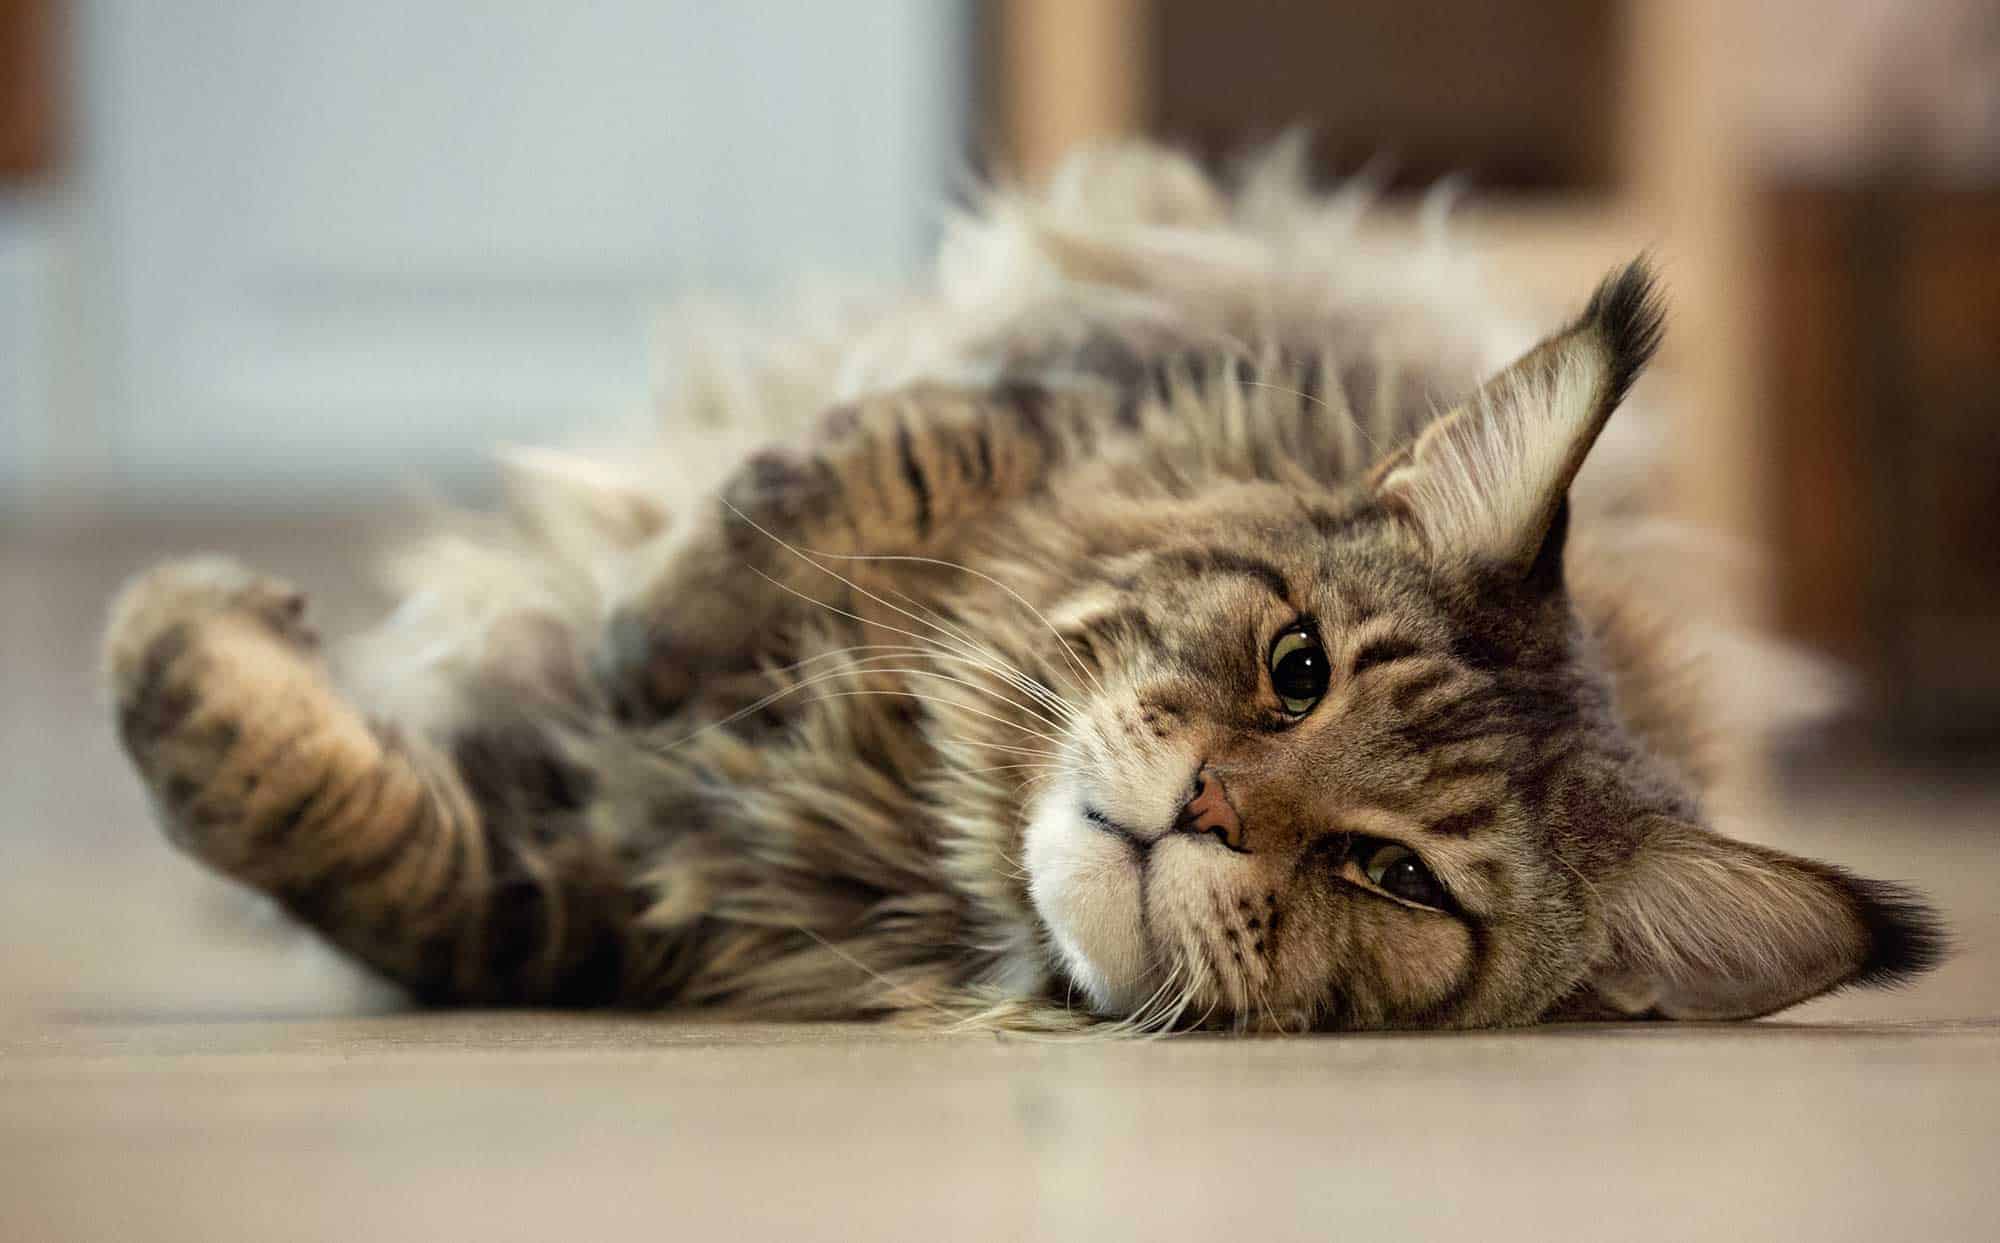 A cat rolling around on the floor